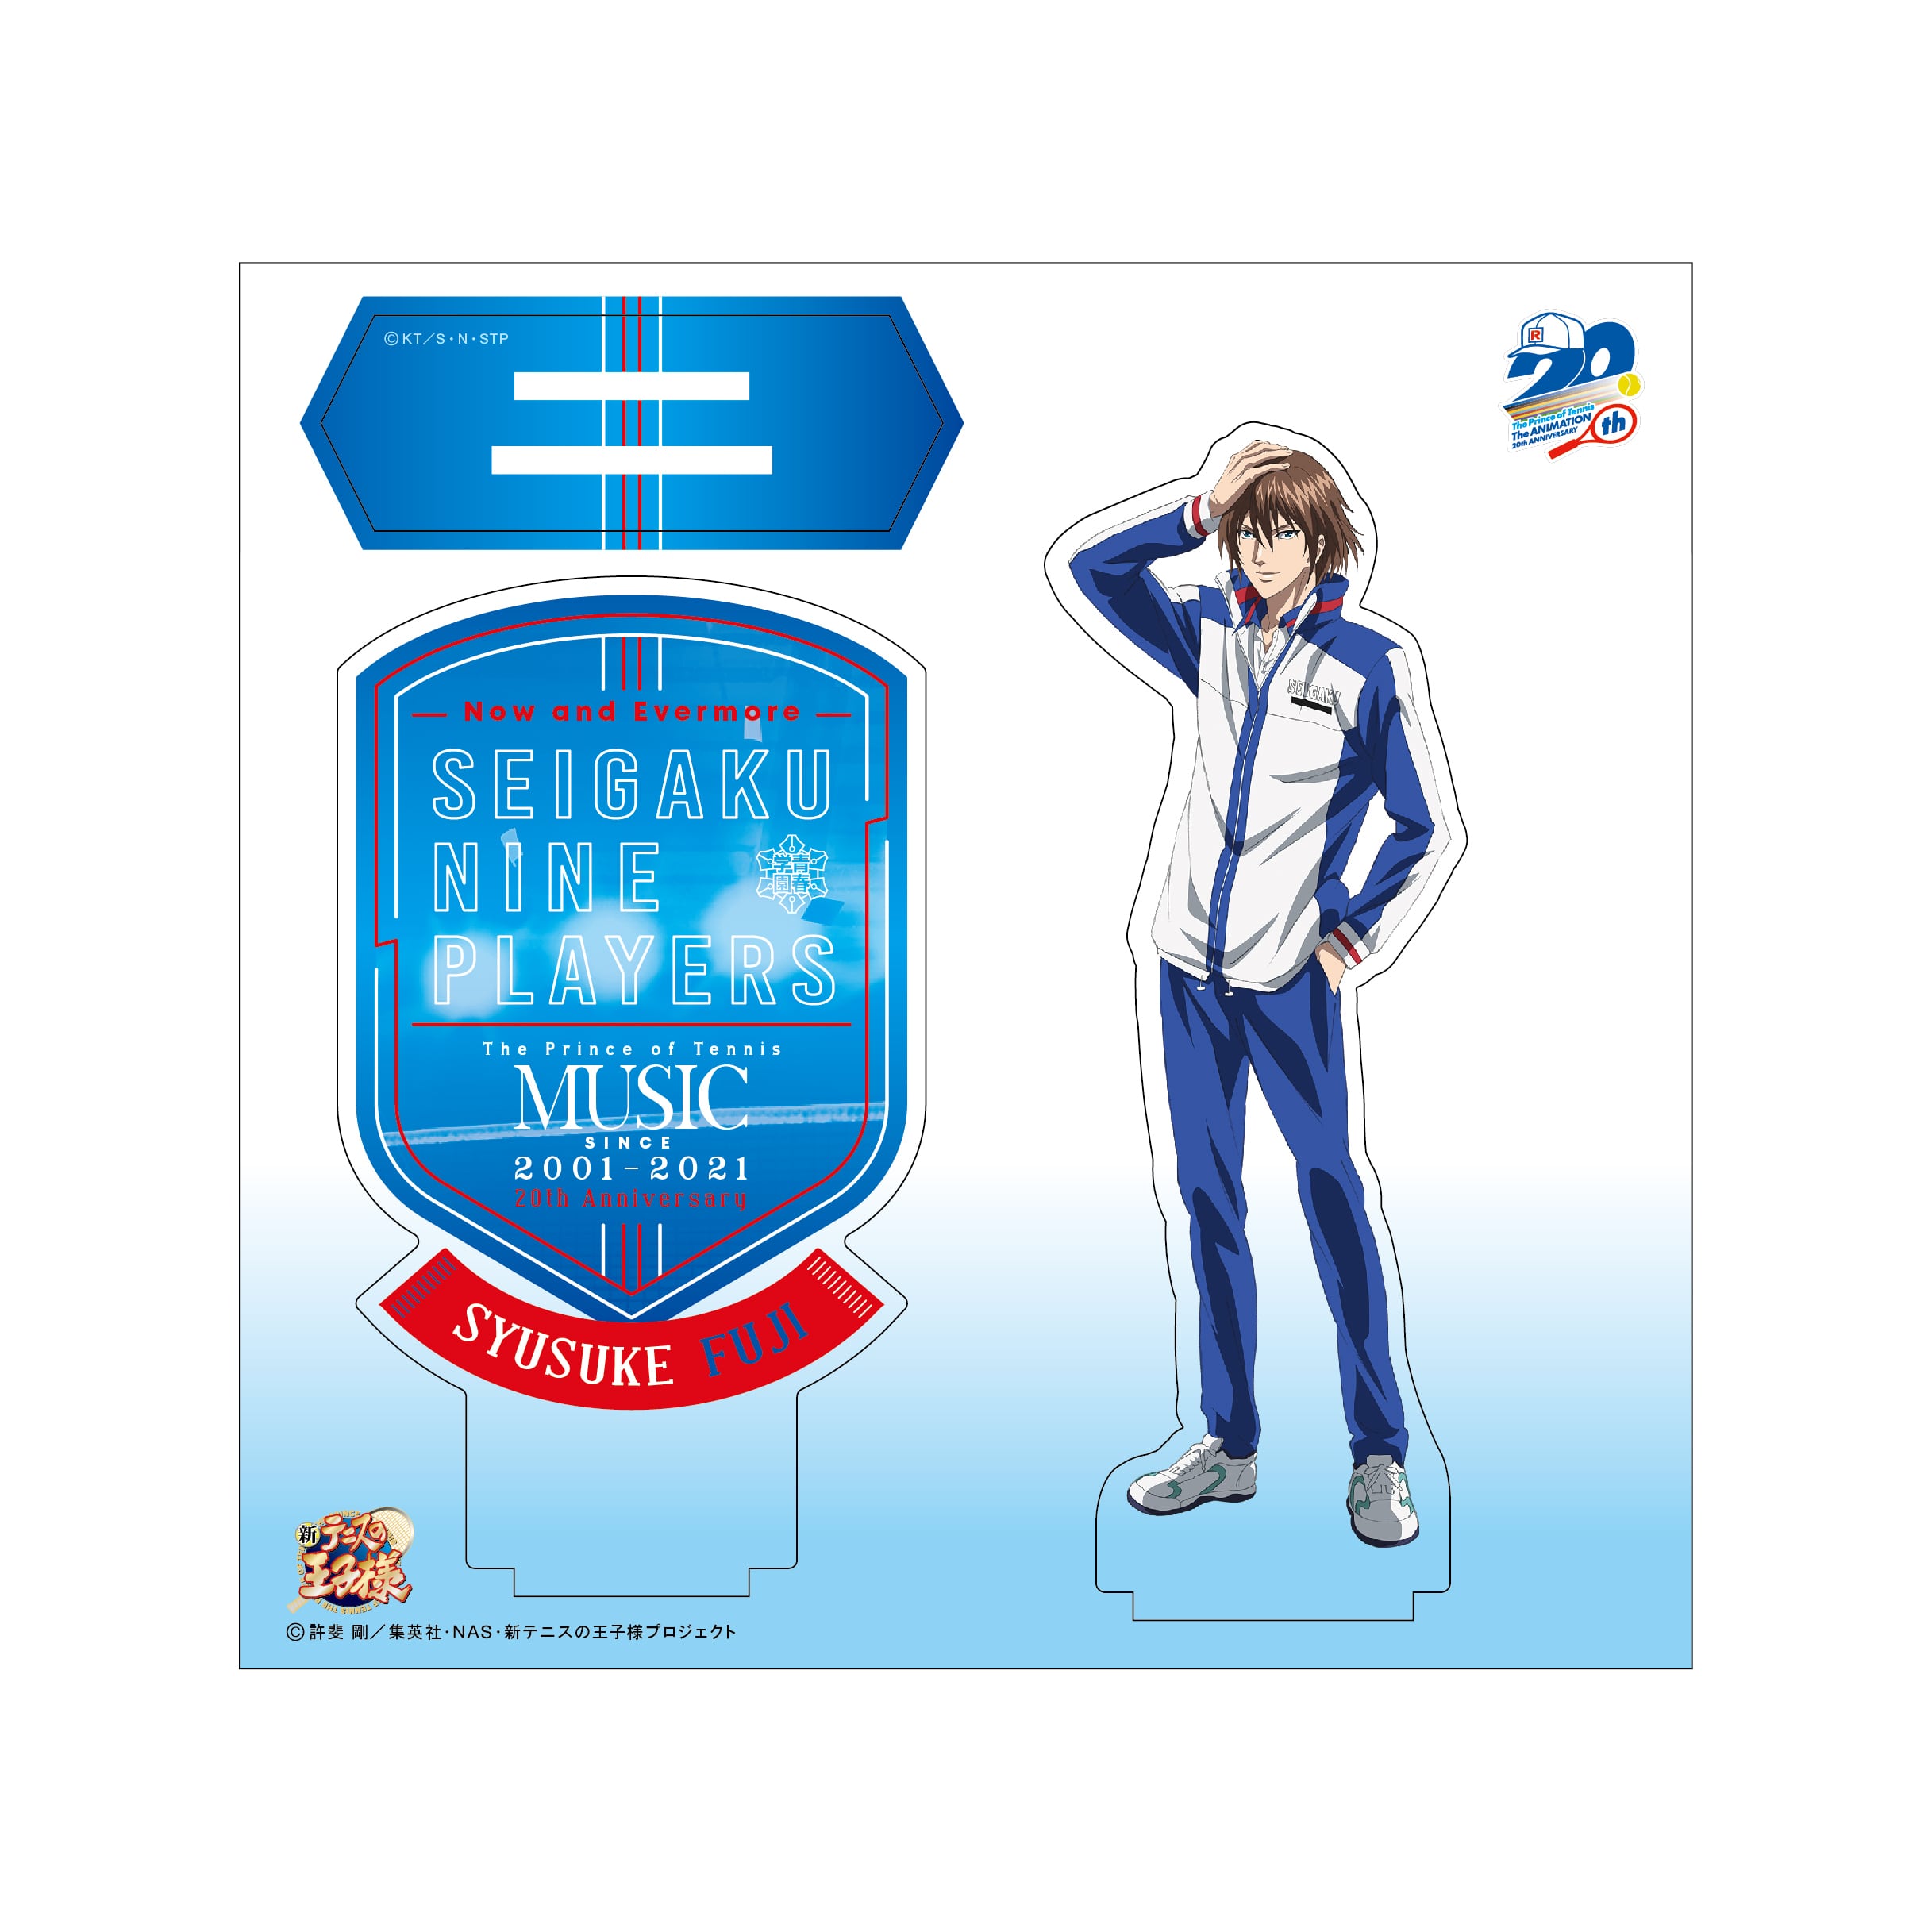 SEIGAKU NINE PLAYERS「Now and Evermore」キャラクターアクリルスタンド 不二周助